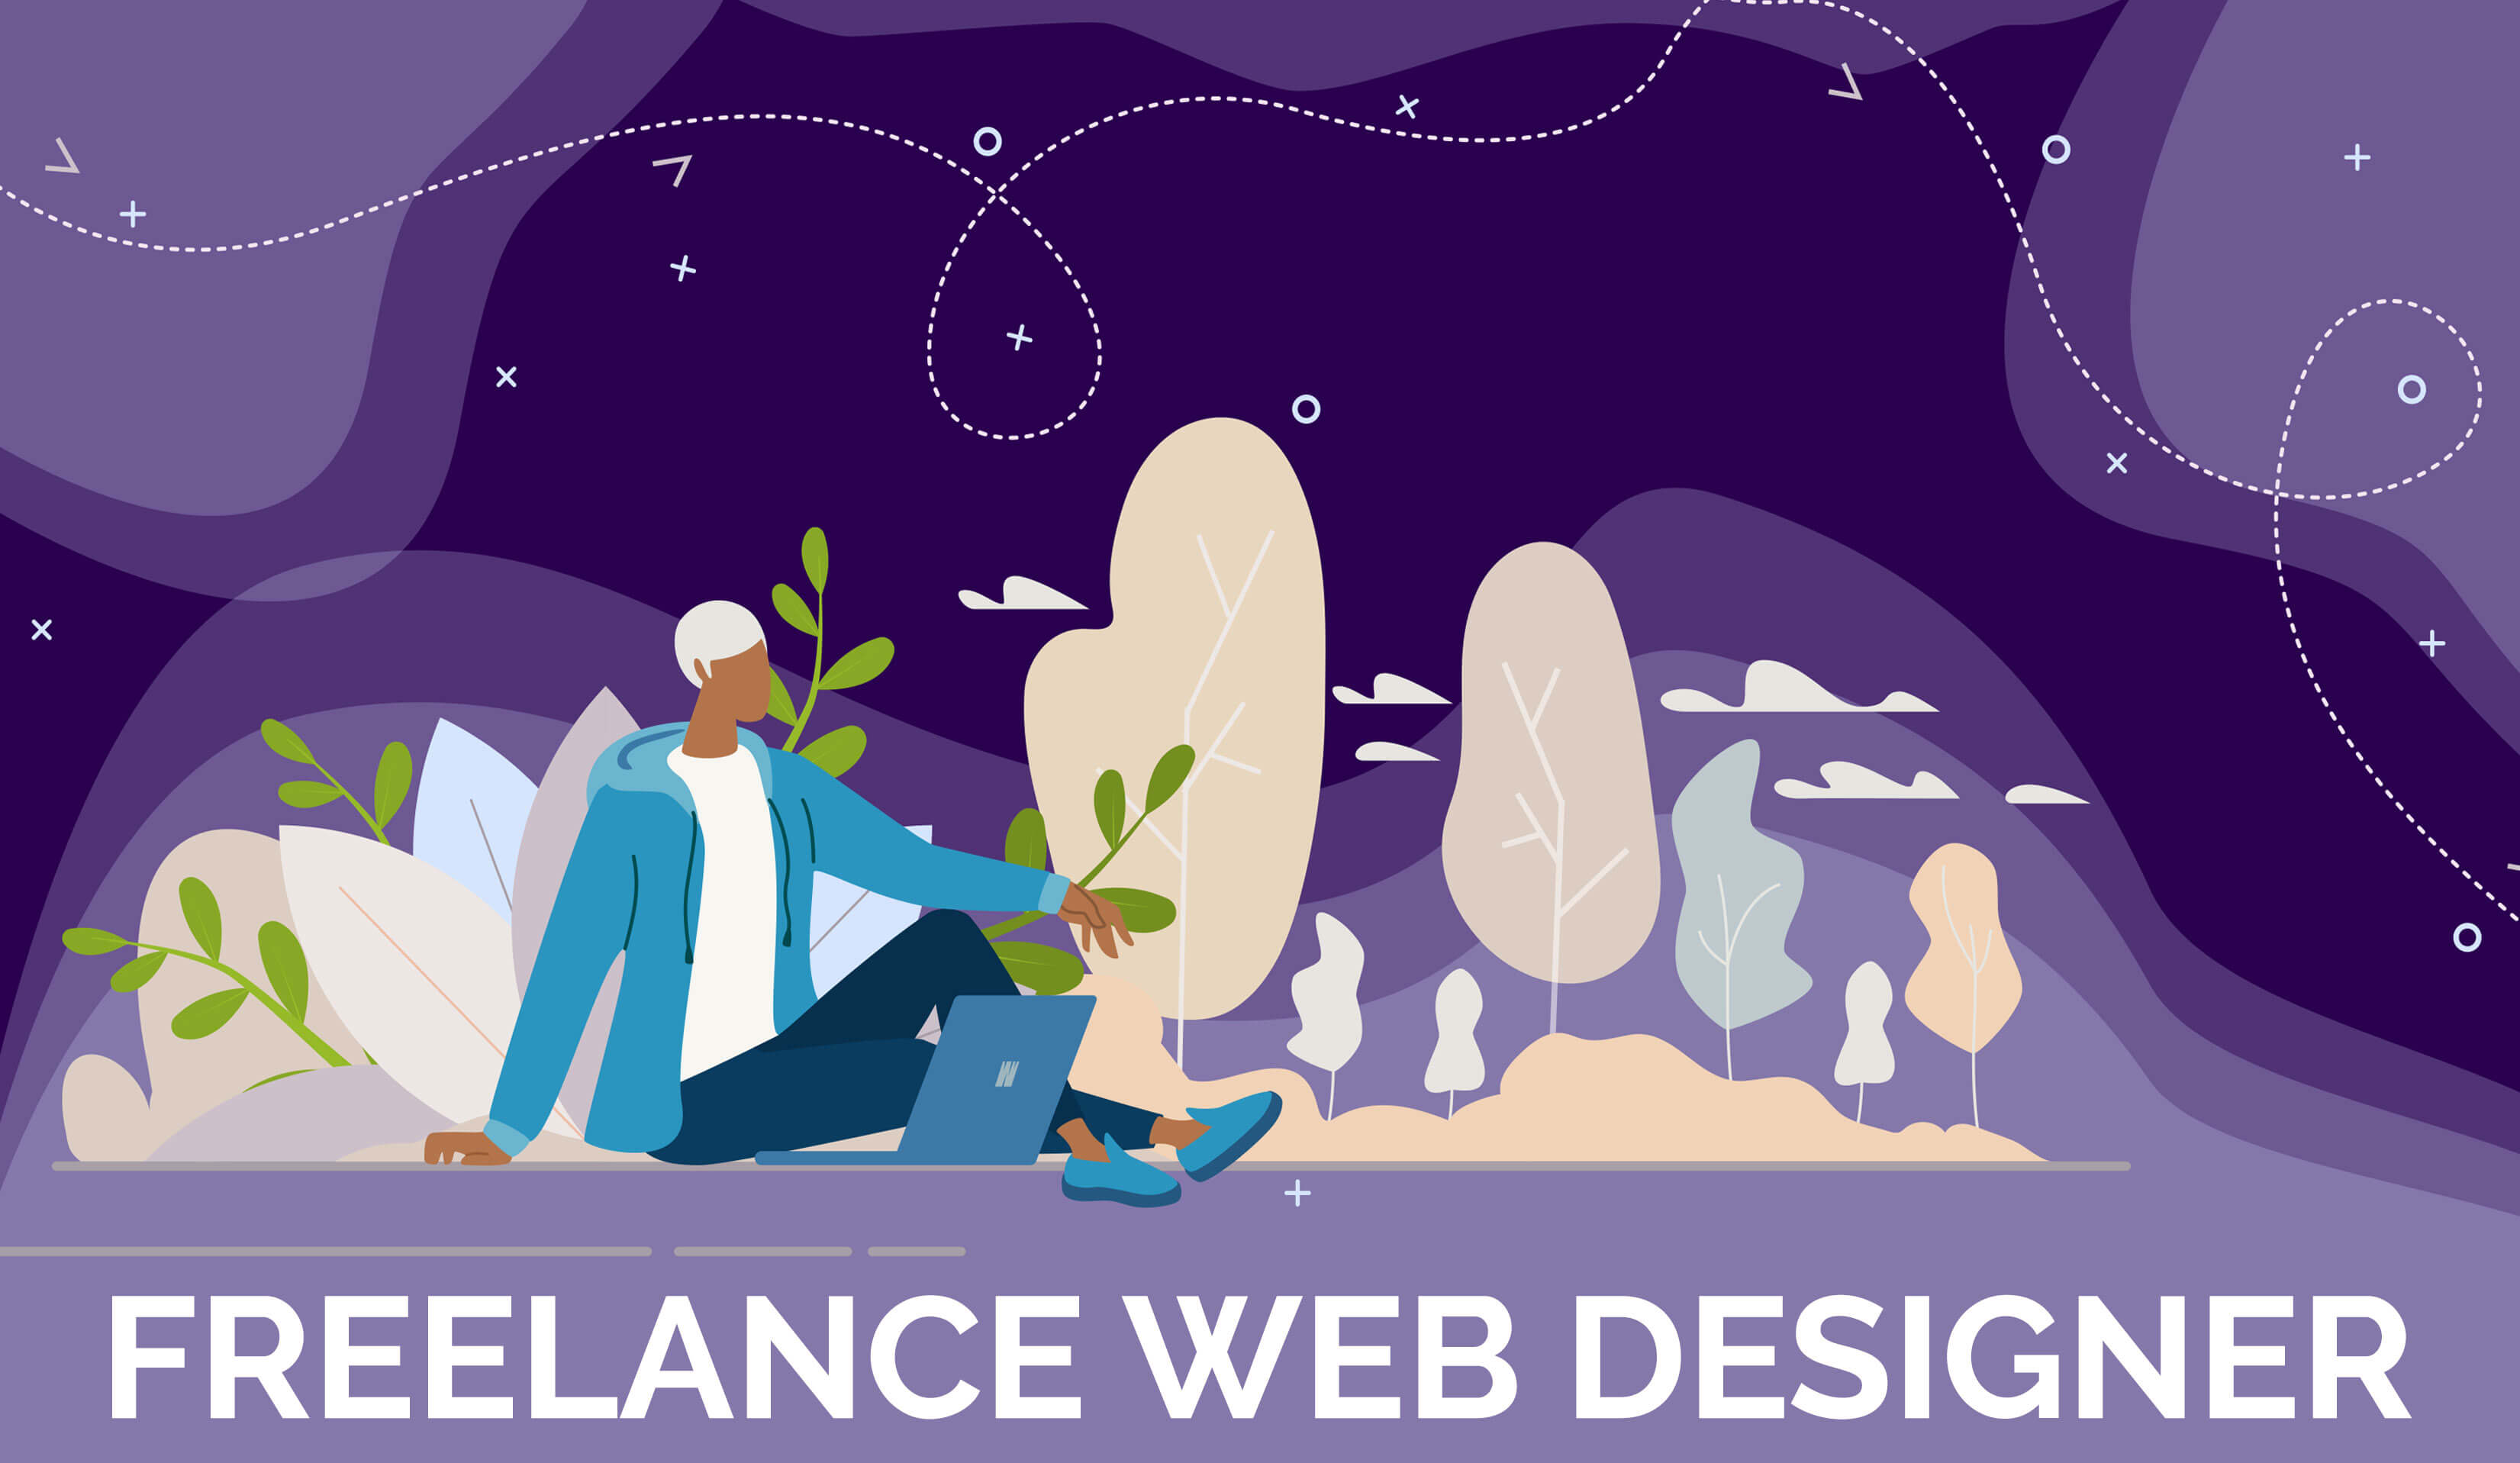 How to Hire Freelance Web Designers and Developers in the US